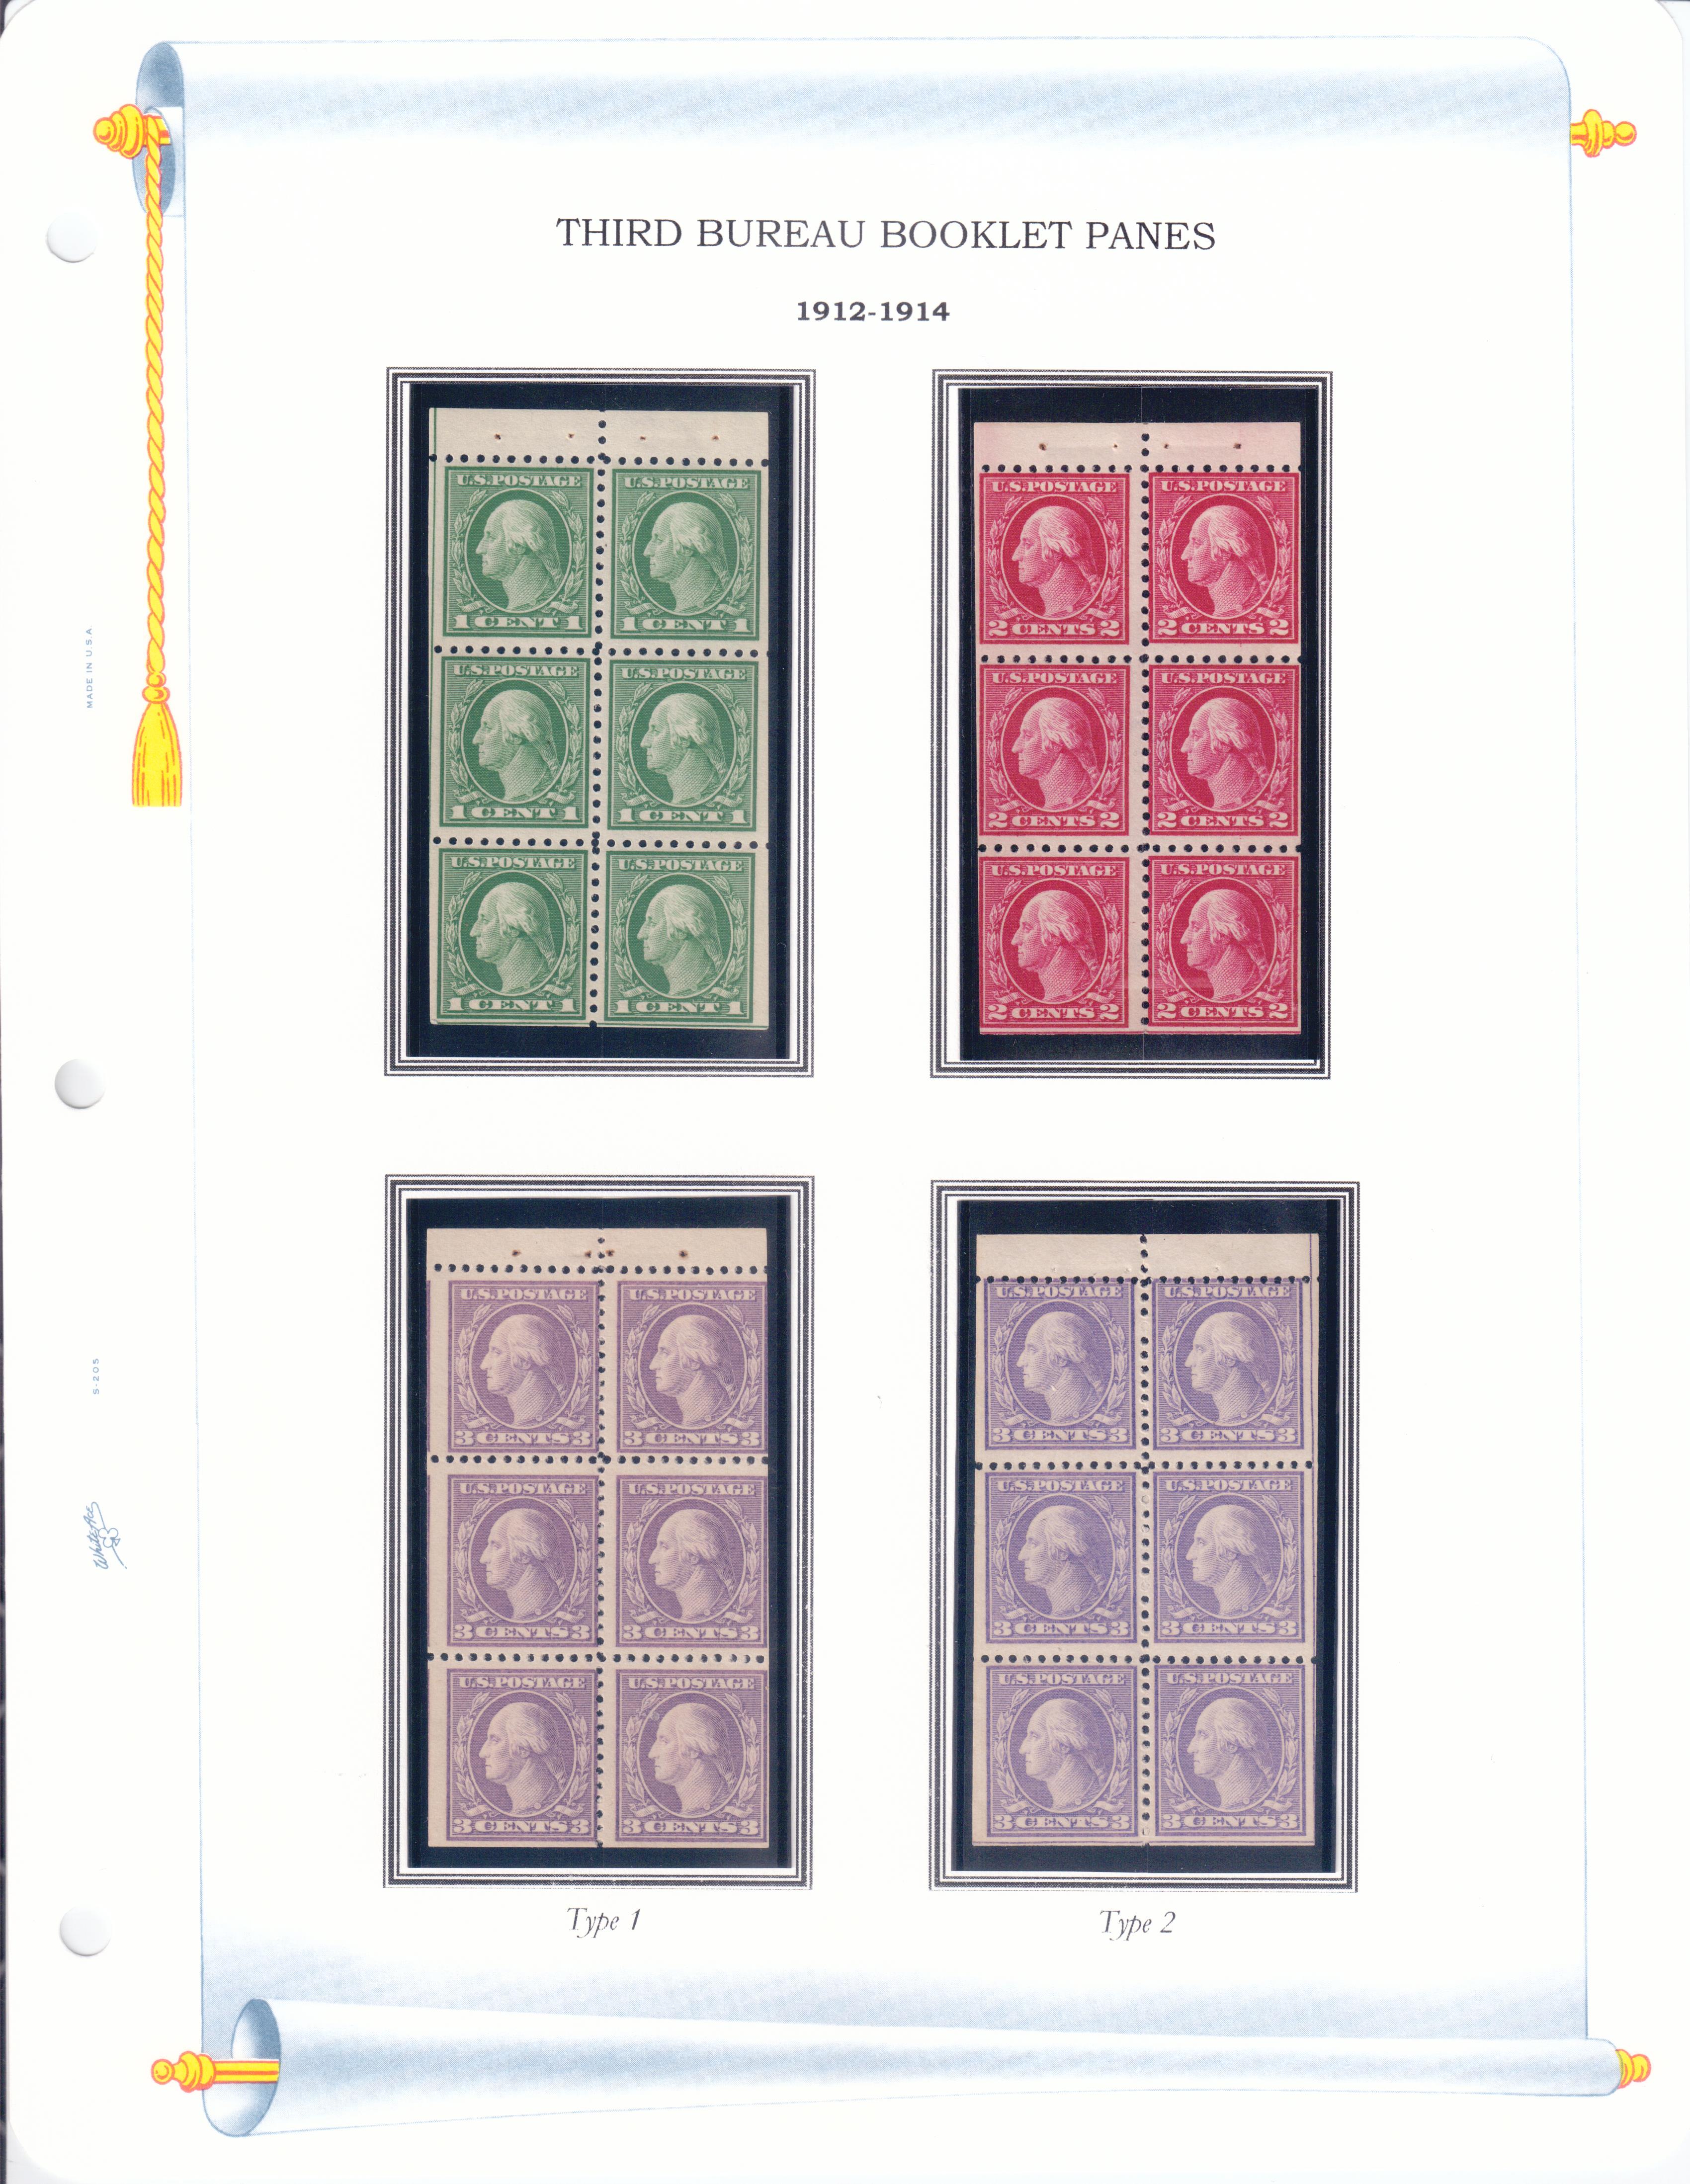 White Ace Historical Postage Stamp Album Of The United Nations – Cool Stuff  PD